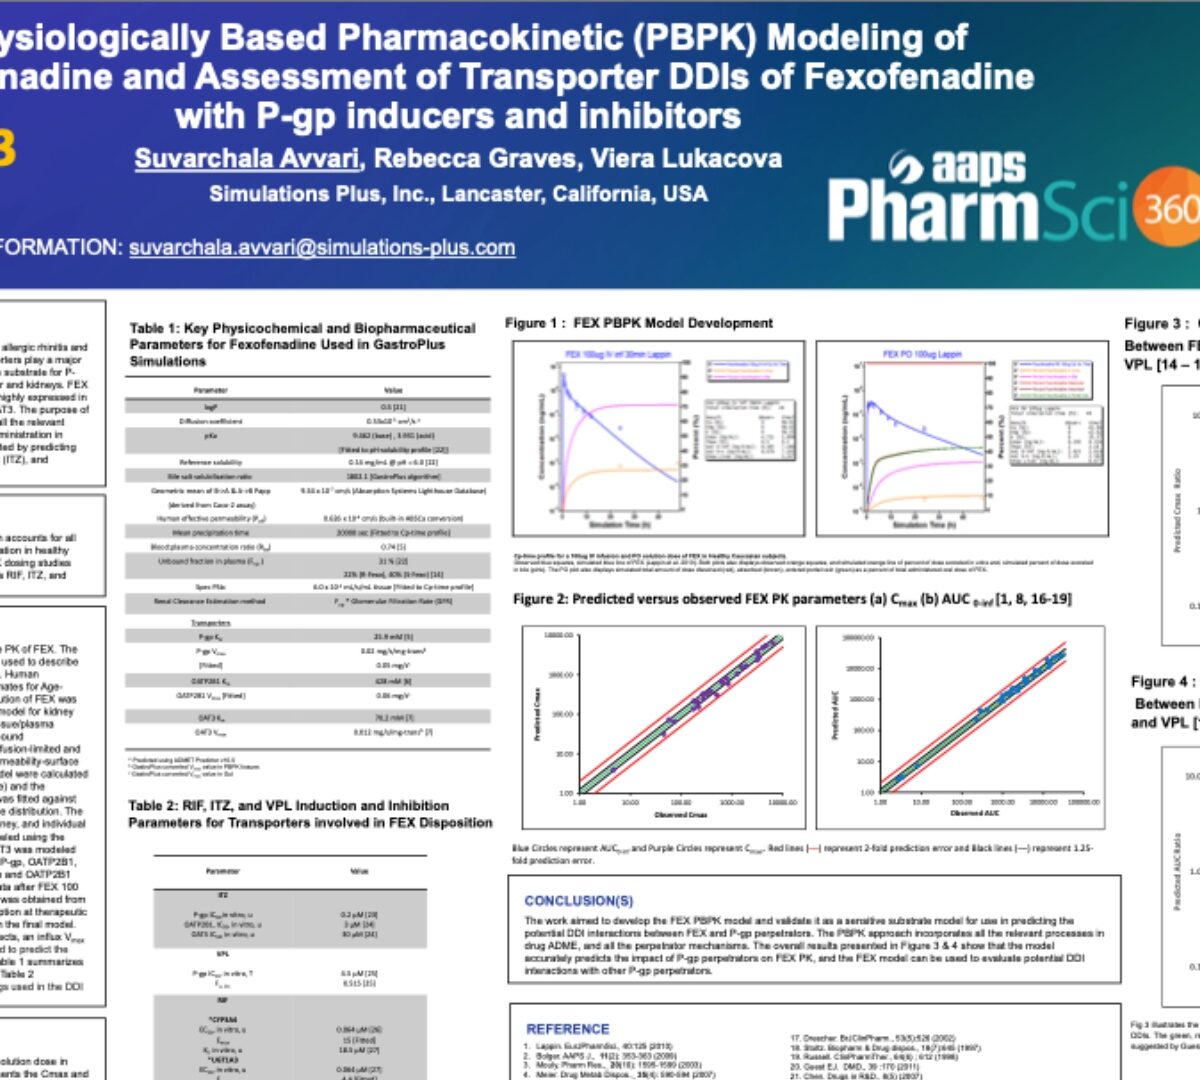 Physiologically Based Pharmacokinetic (PBPK) Modeling of Fexofenadine and Assessment of Transporter DDIs of Fexofenadine with P-gp inducers and inhibitors